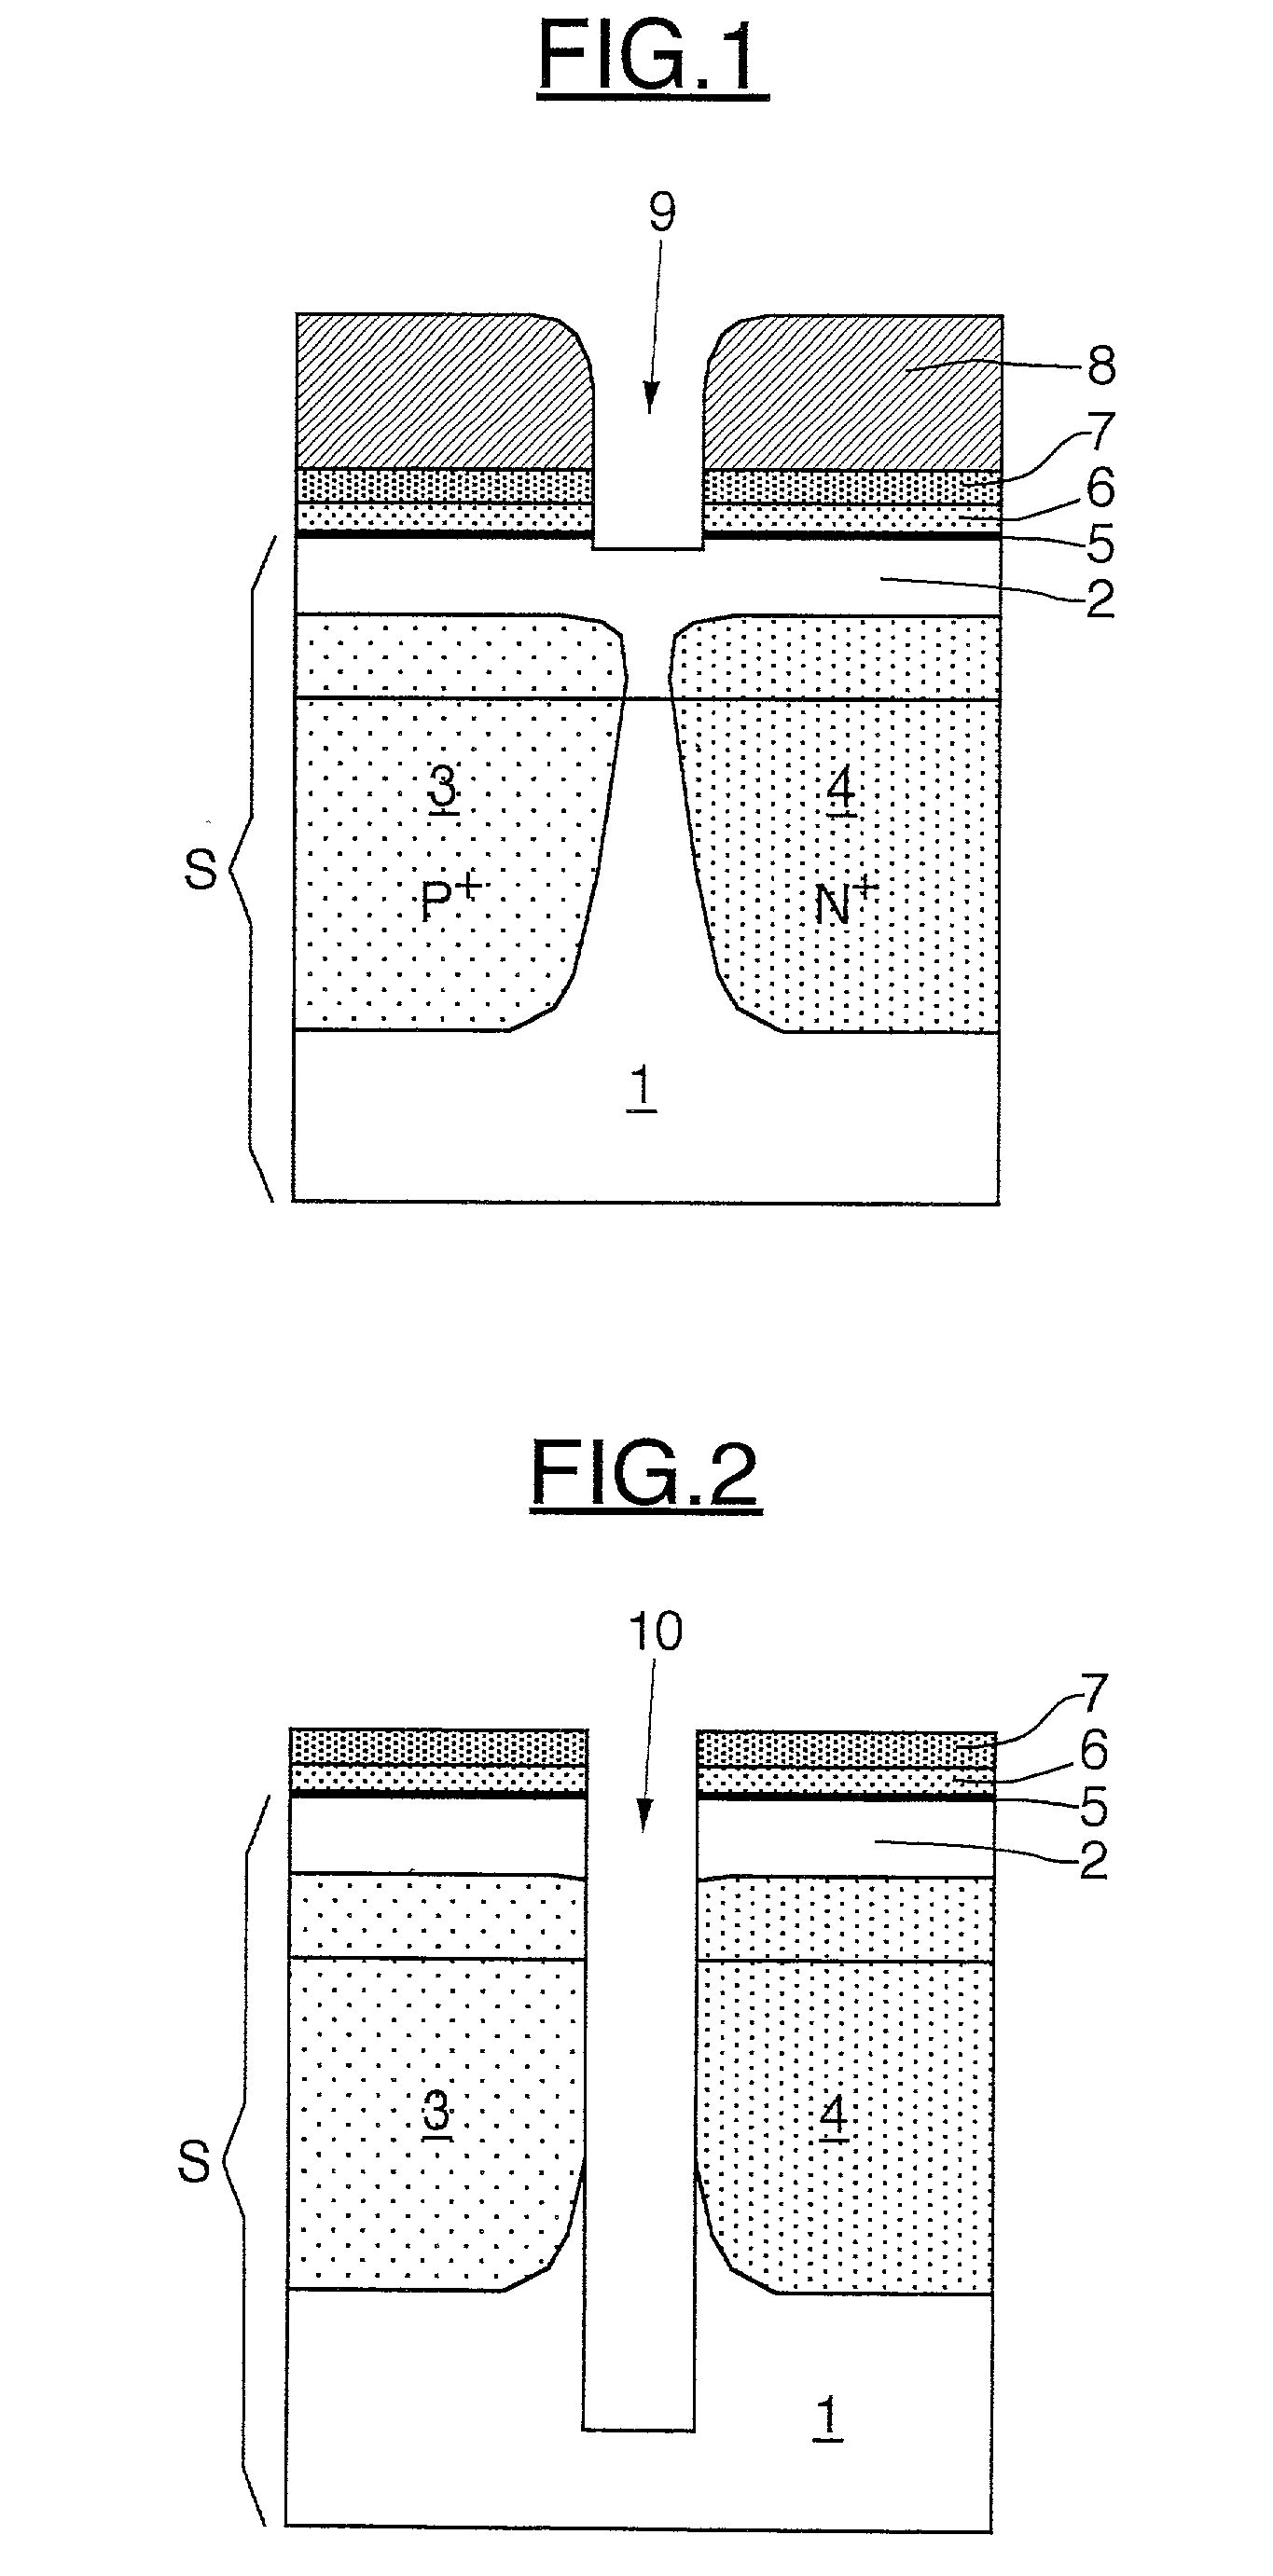 Process for forming deep and shallow insulative regions of an integrated circuit